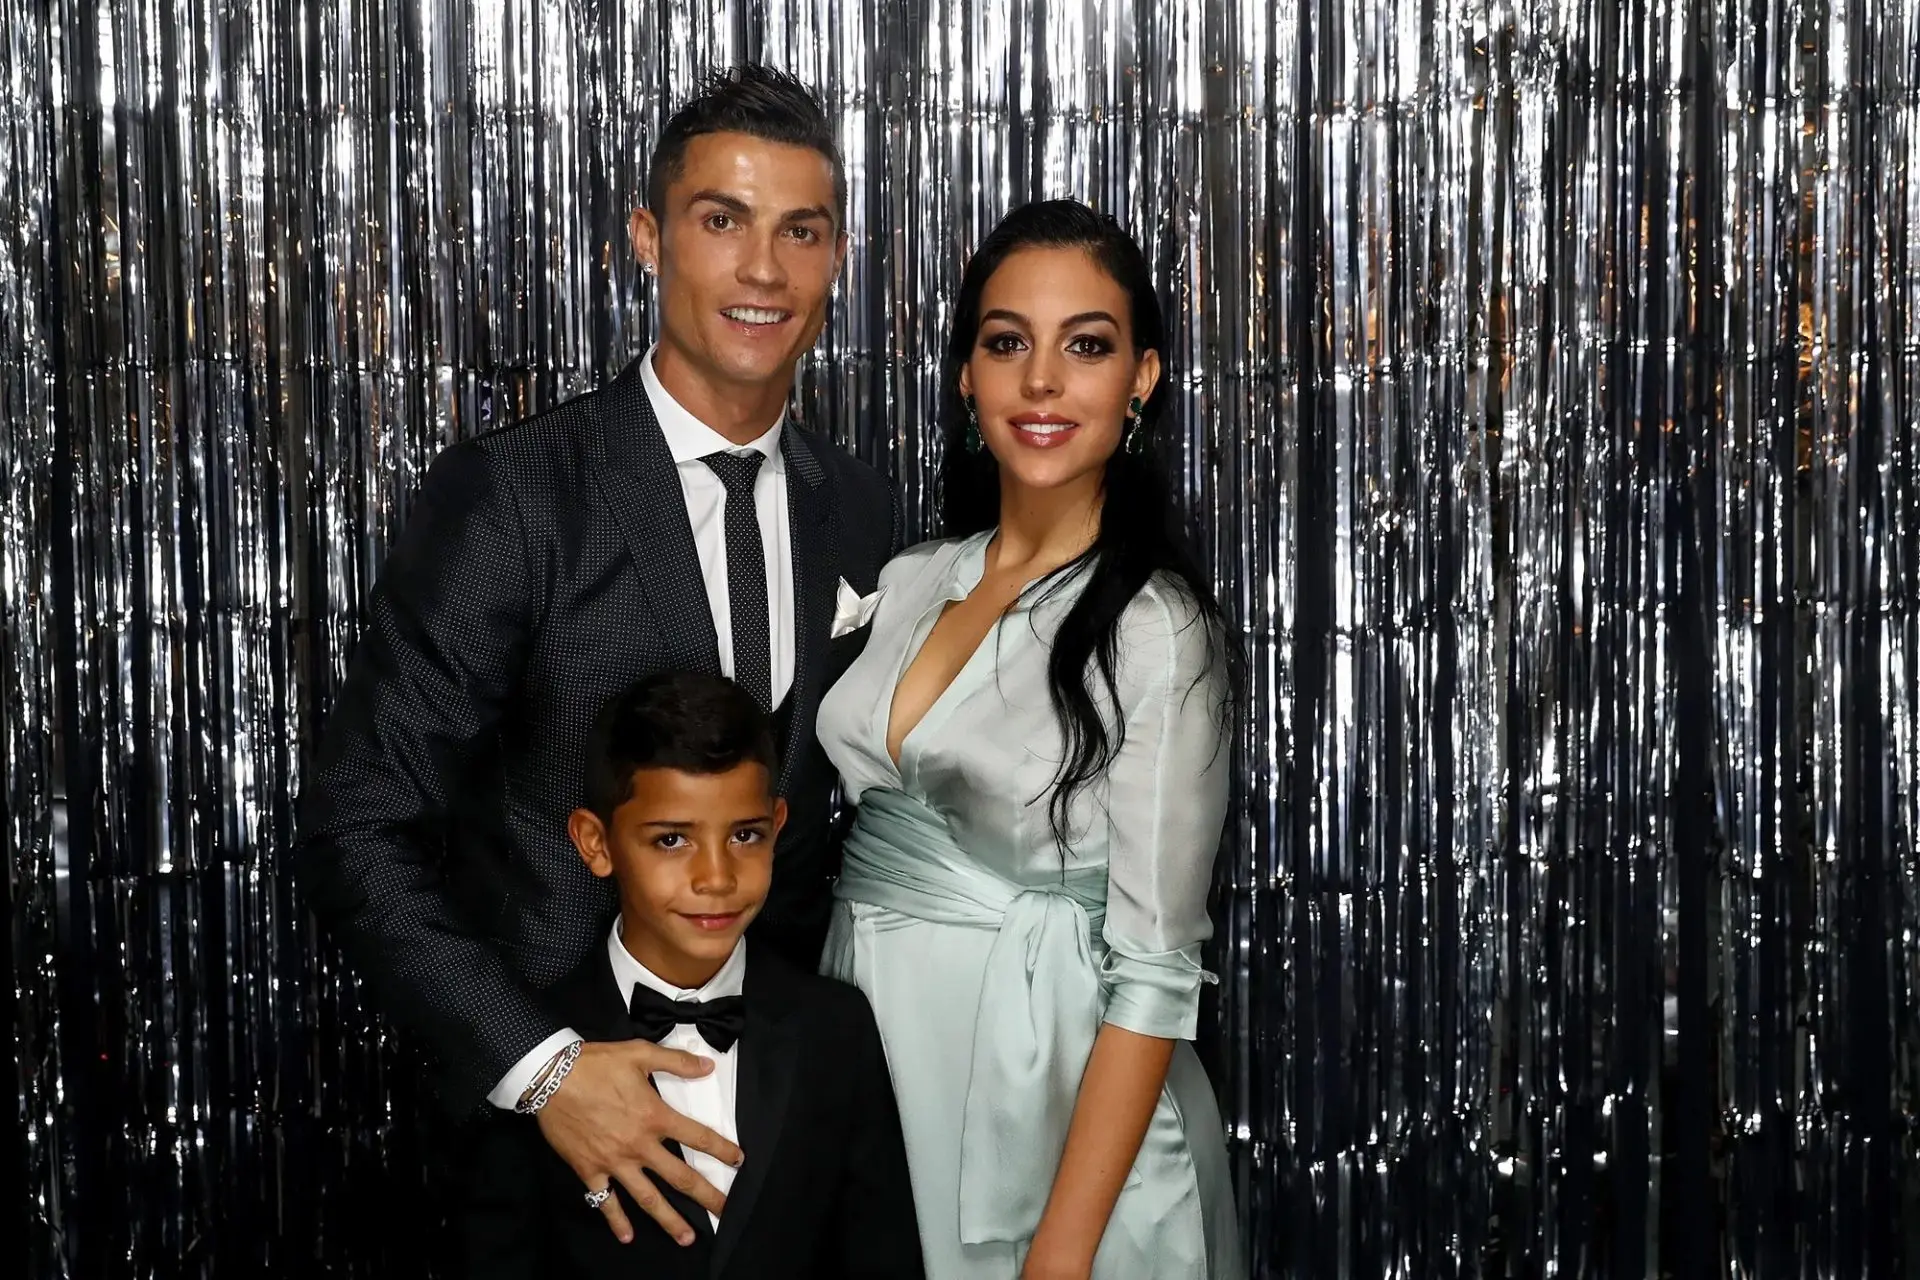 Cristiano Ronaldo Receives Support From His Loved Ones